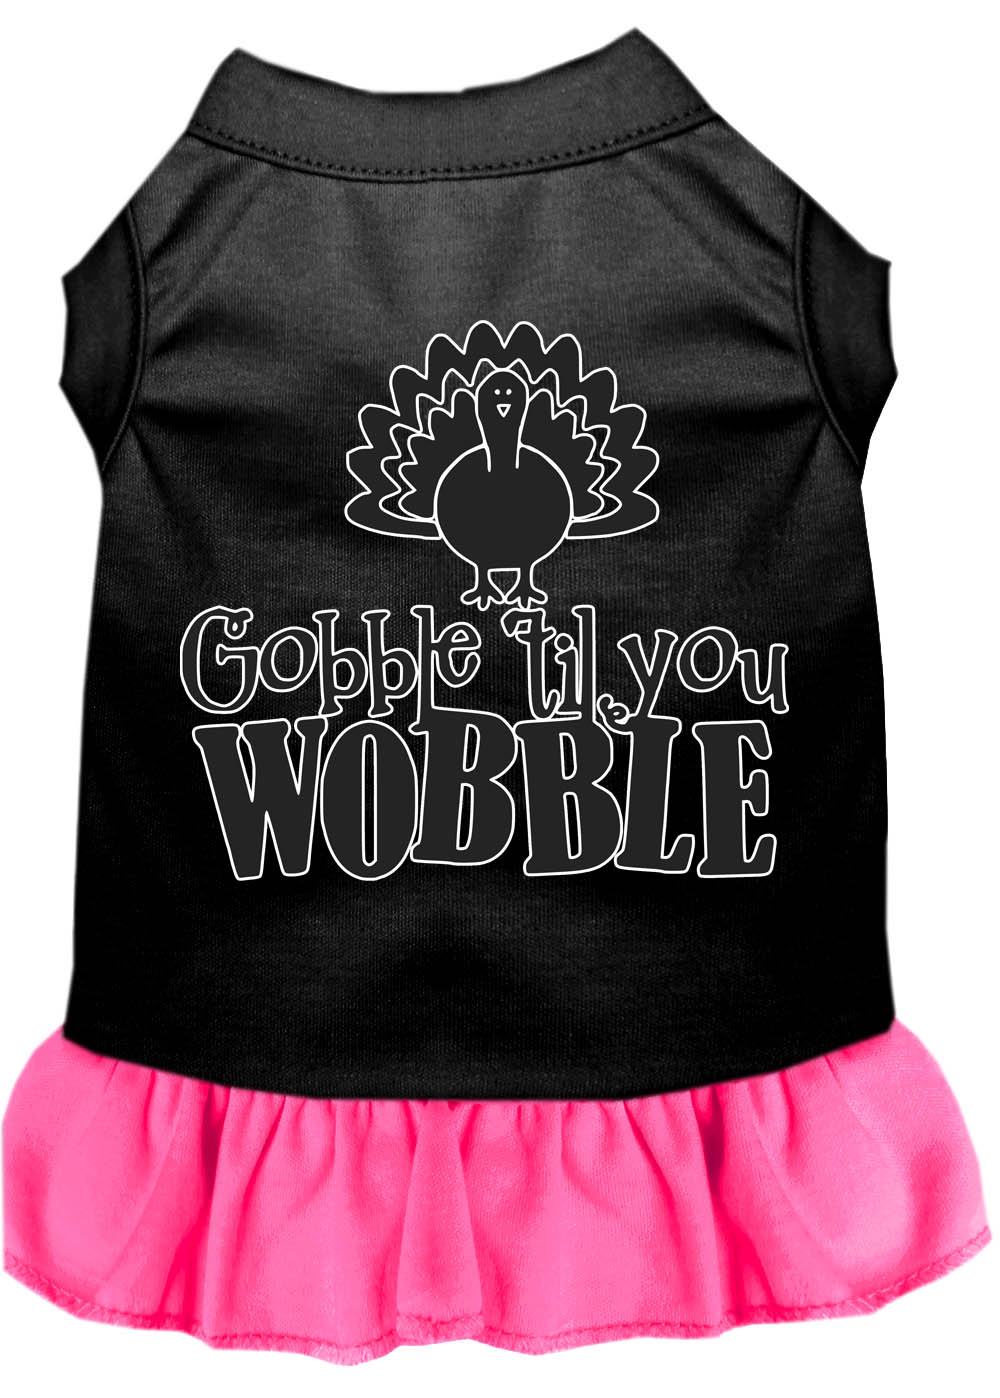 Gobble til You Wobble Screen Print Dog Dress Black with Bright Pink Sm